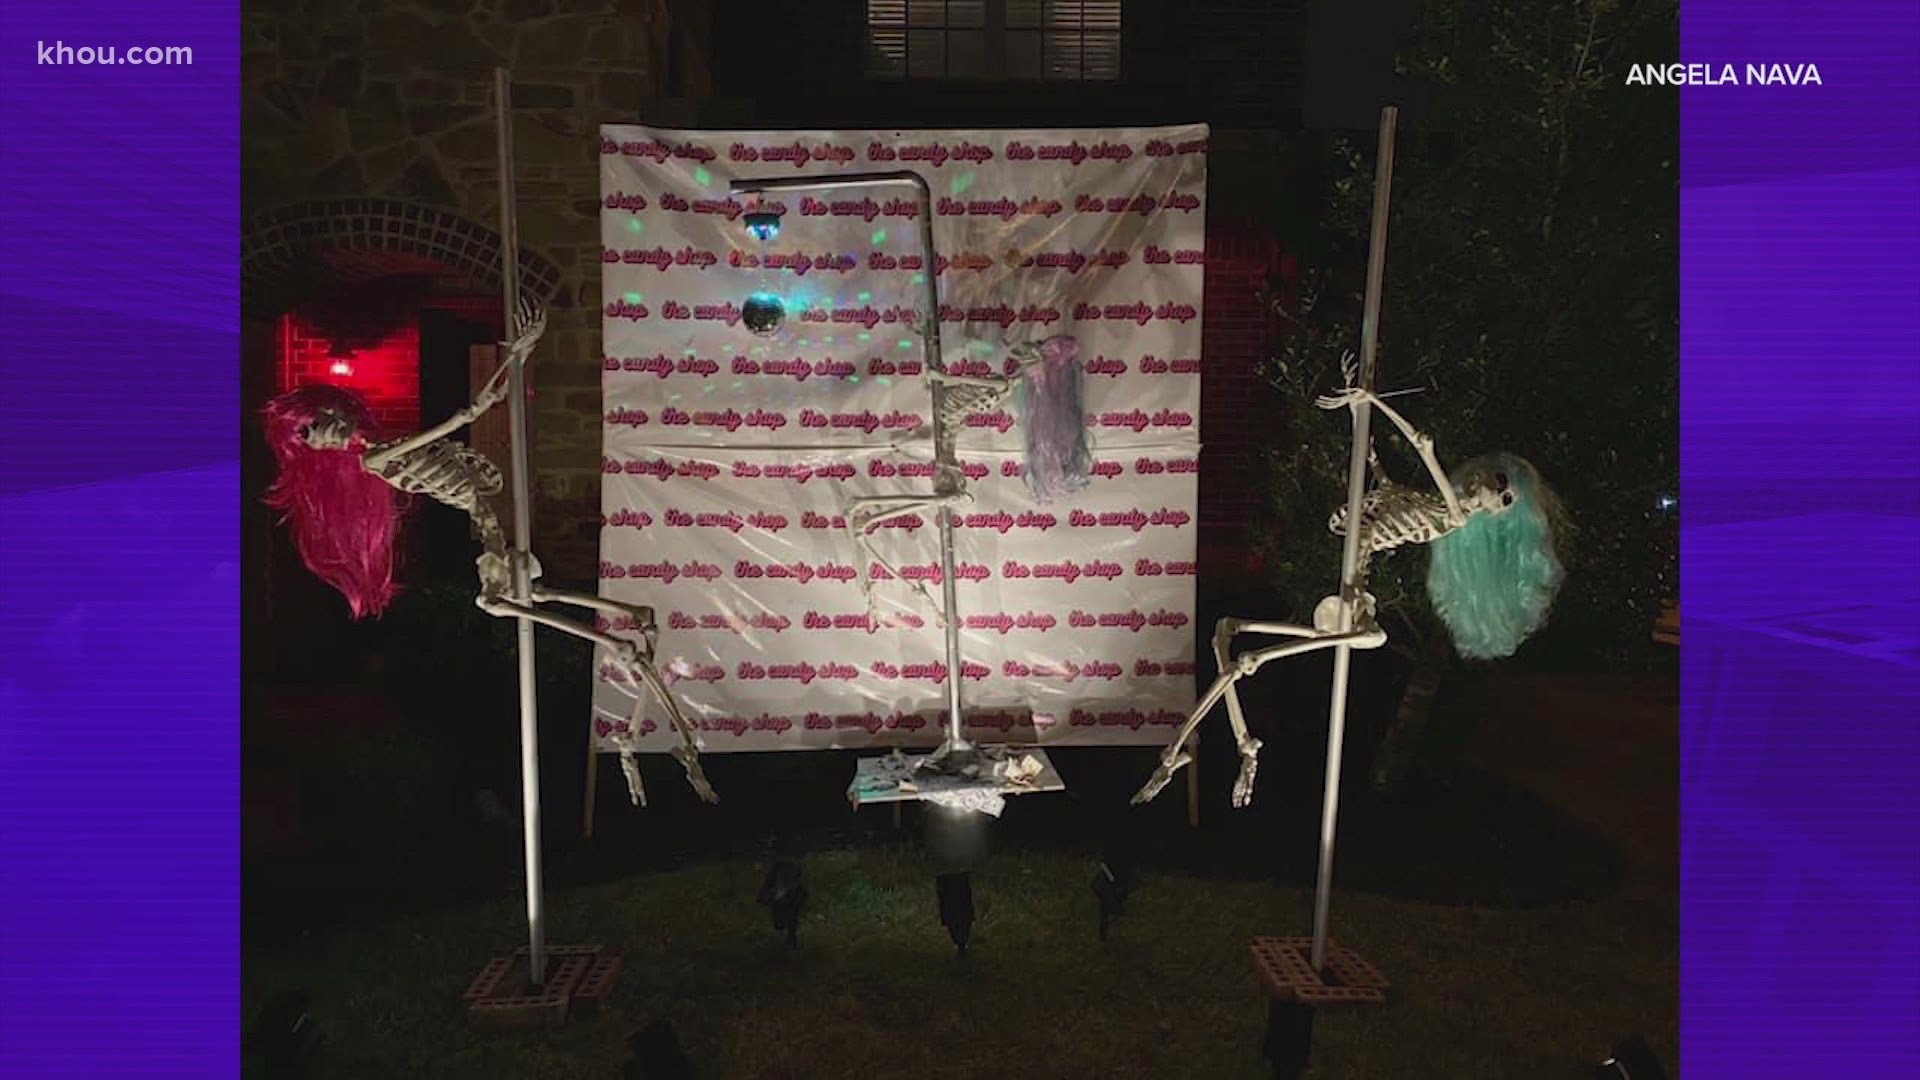 Angela Nava, a homeowner in Richmond, brought all of her skeletons out of the closet and put them in her yard for the holiday season.